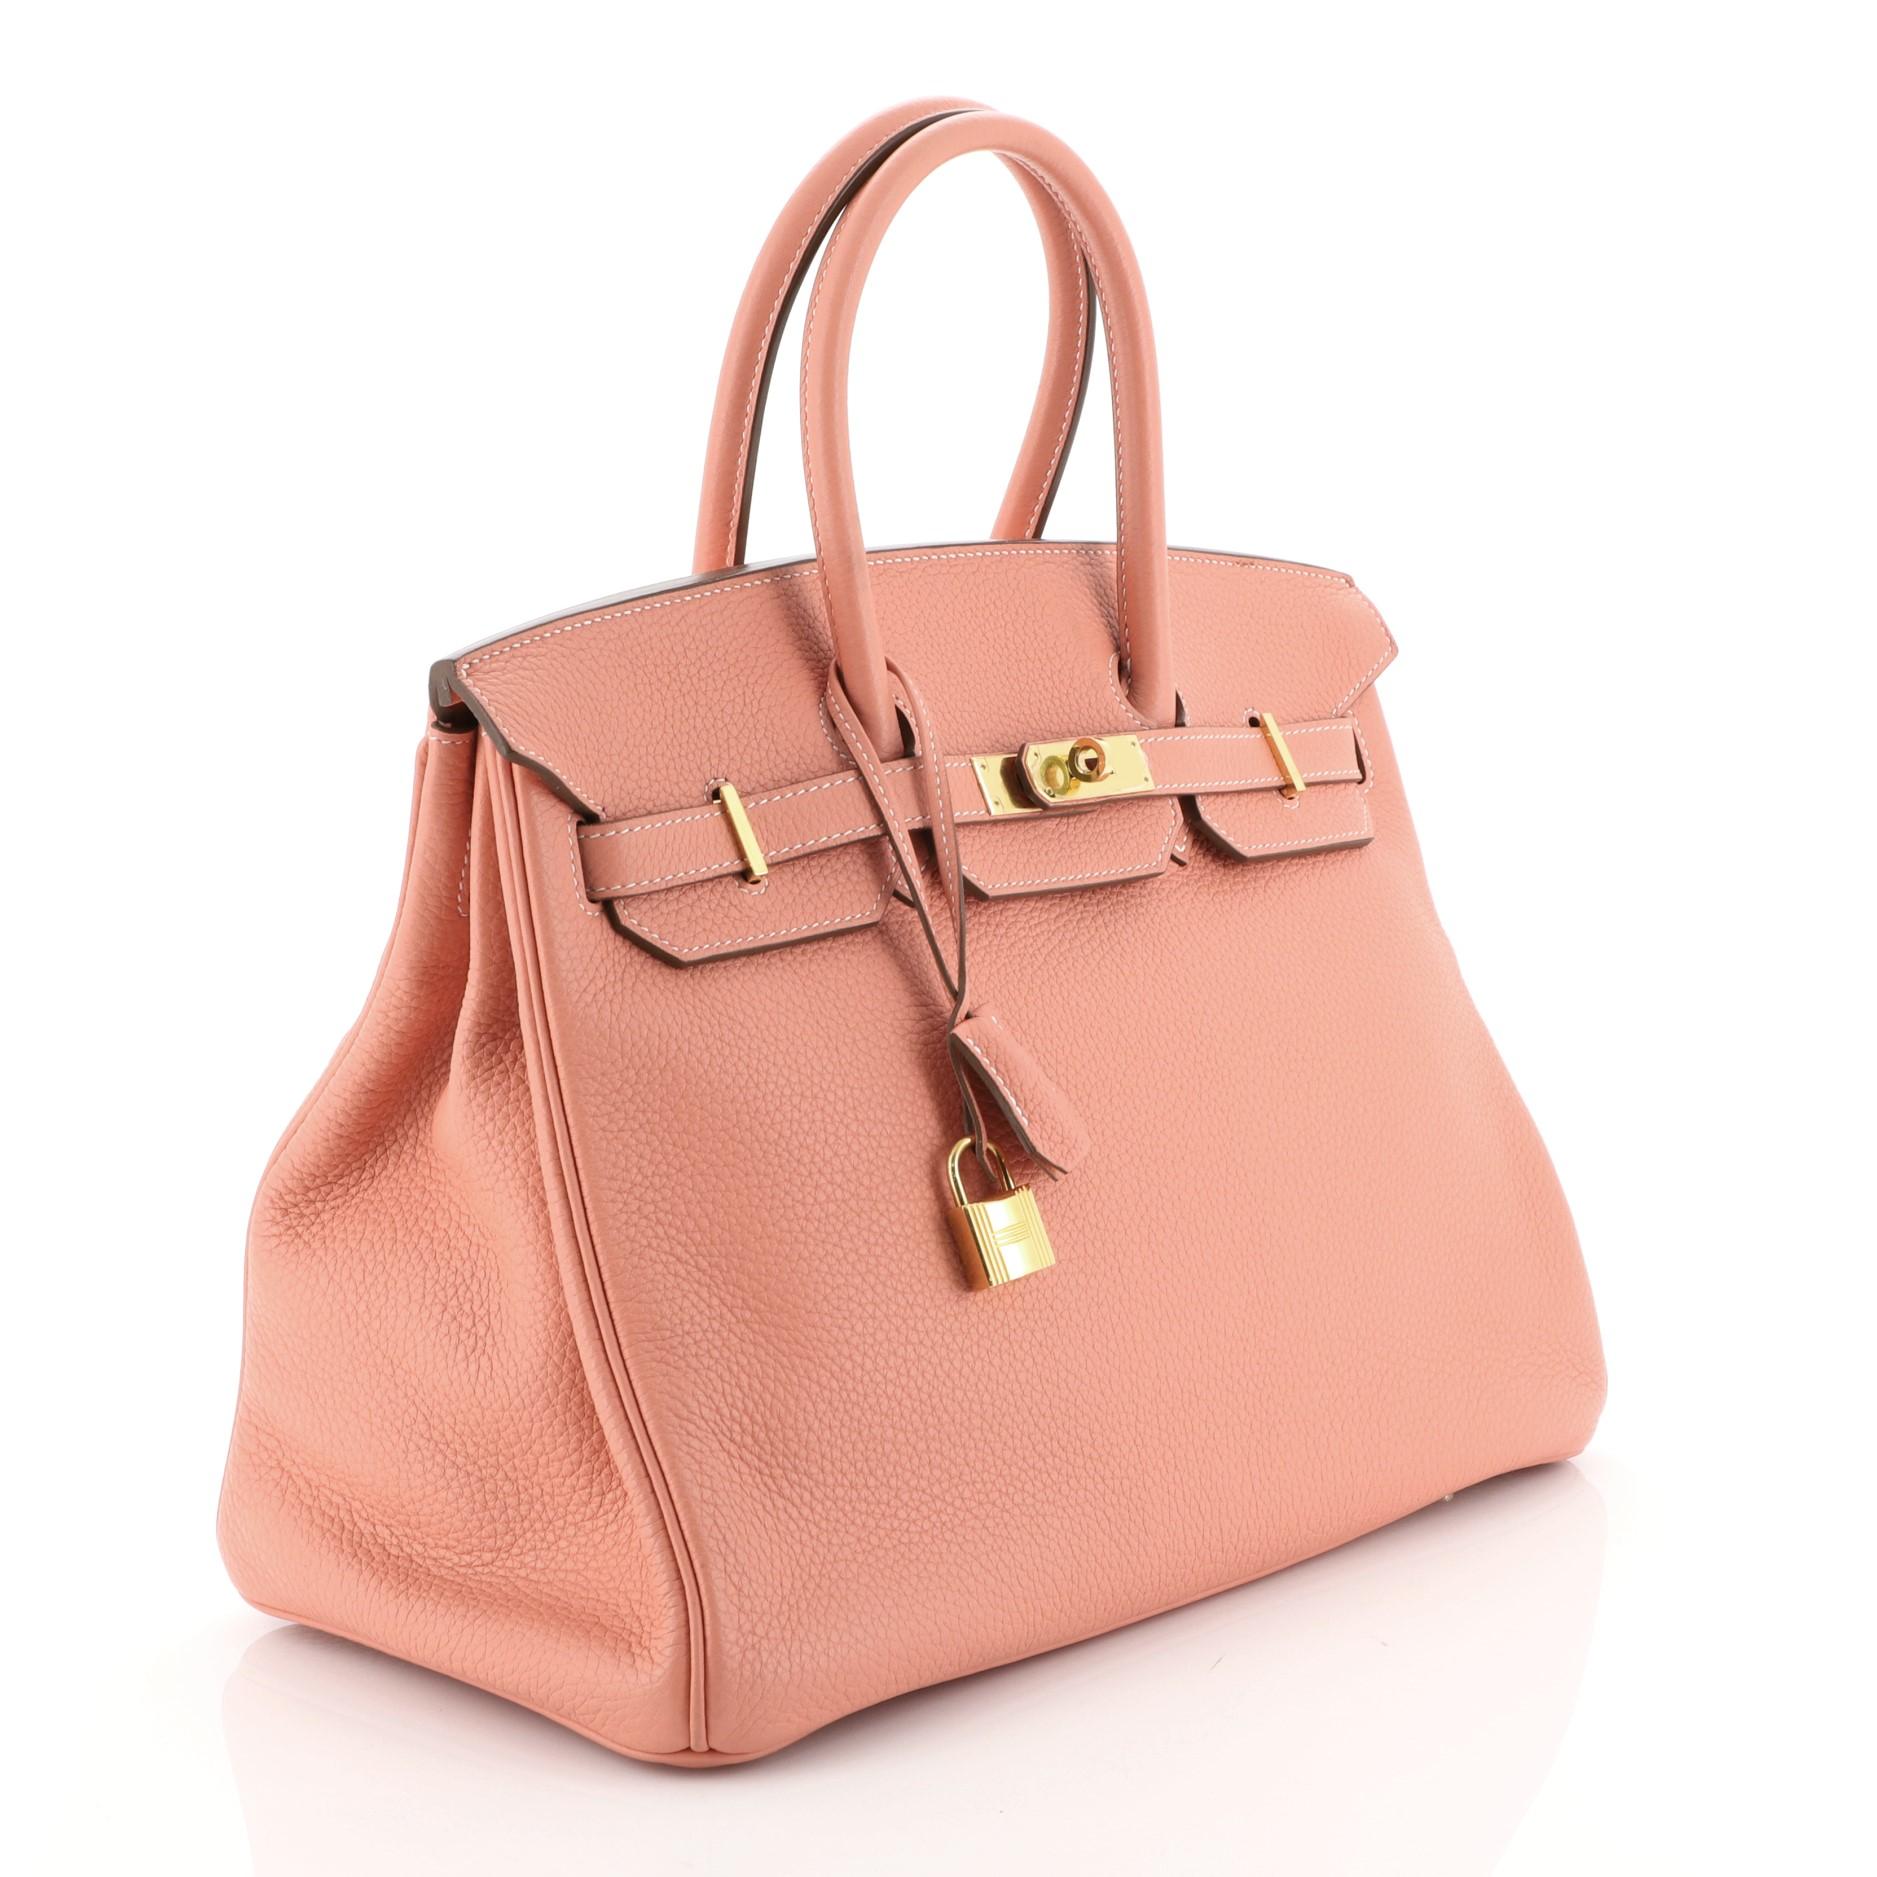 This Hermes Birkin Handbag Crevette Clemence with Gold Hardware 35, crafted in Crevette pink Clemence leather, features dual rolled handles, frontal flap, and gold hardware. Its turn-lock closure opens to a Crevette pink Chevre leather interior with